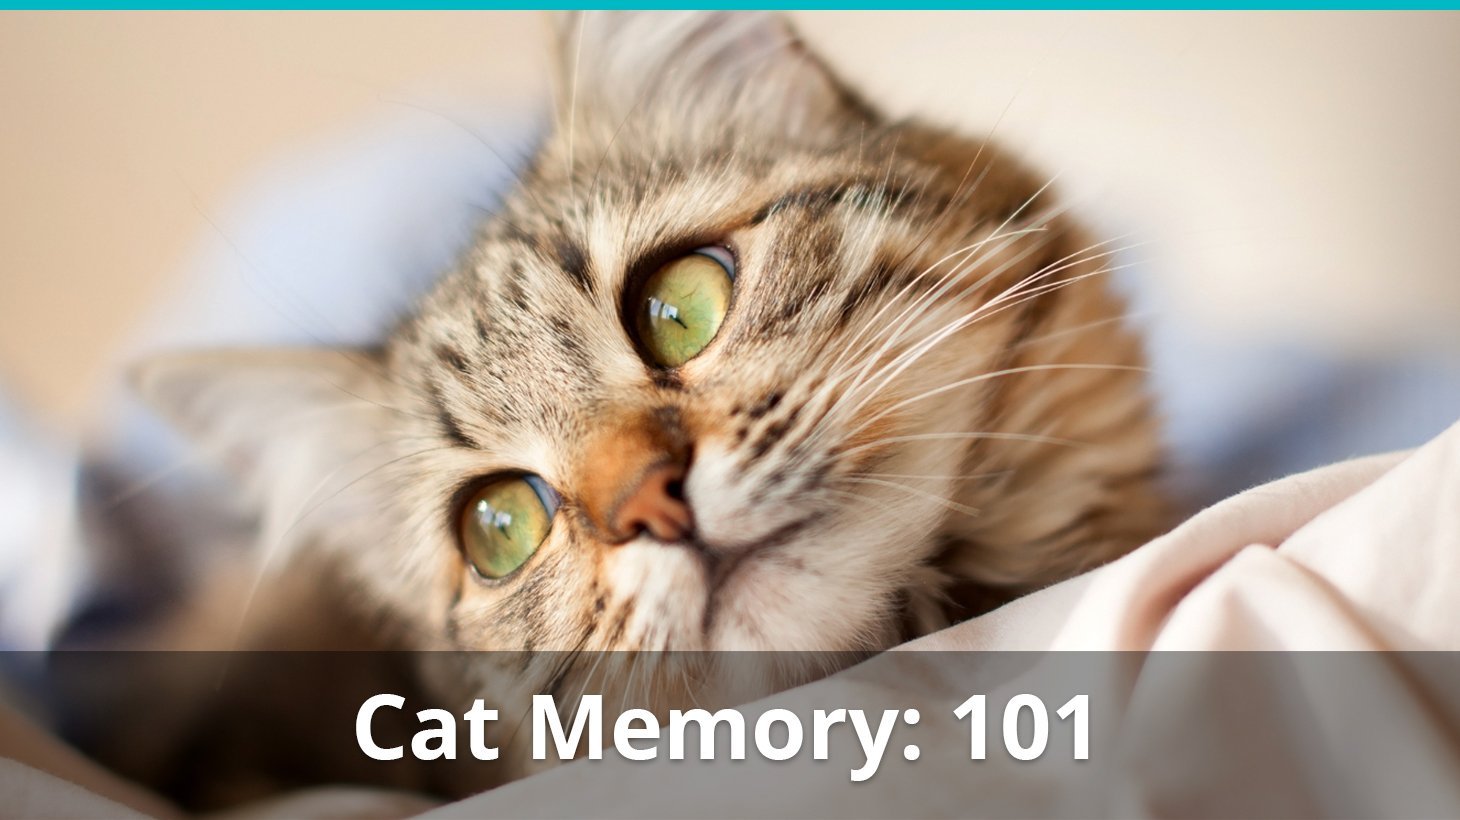 Cat Memory: Do Cats Have A Good Memory Span? Do They Remember?